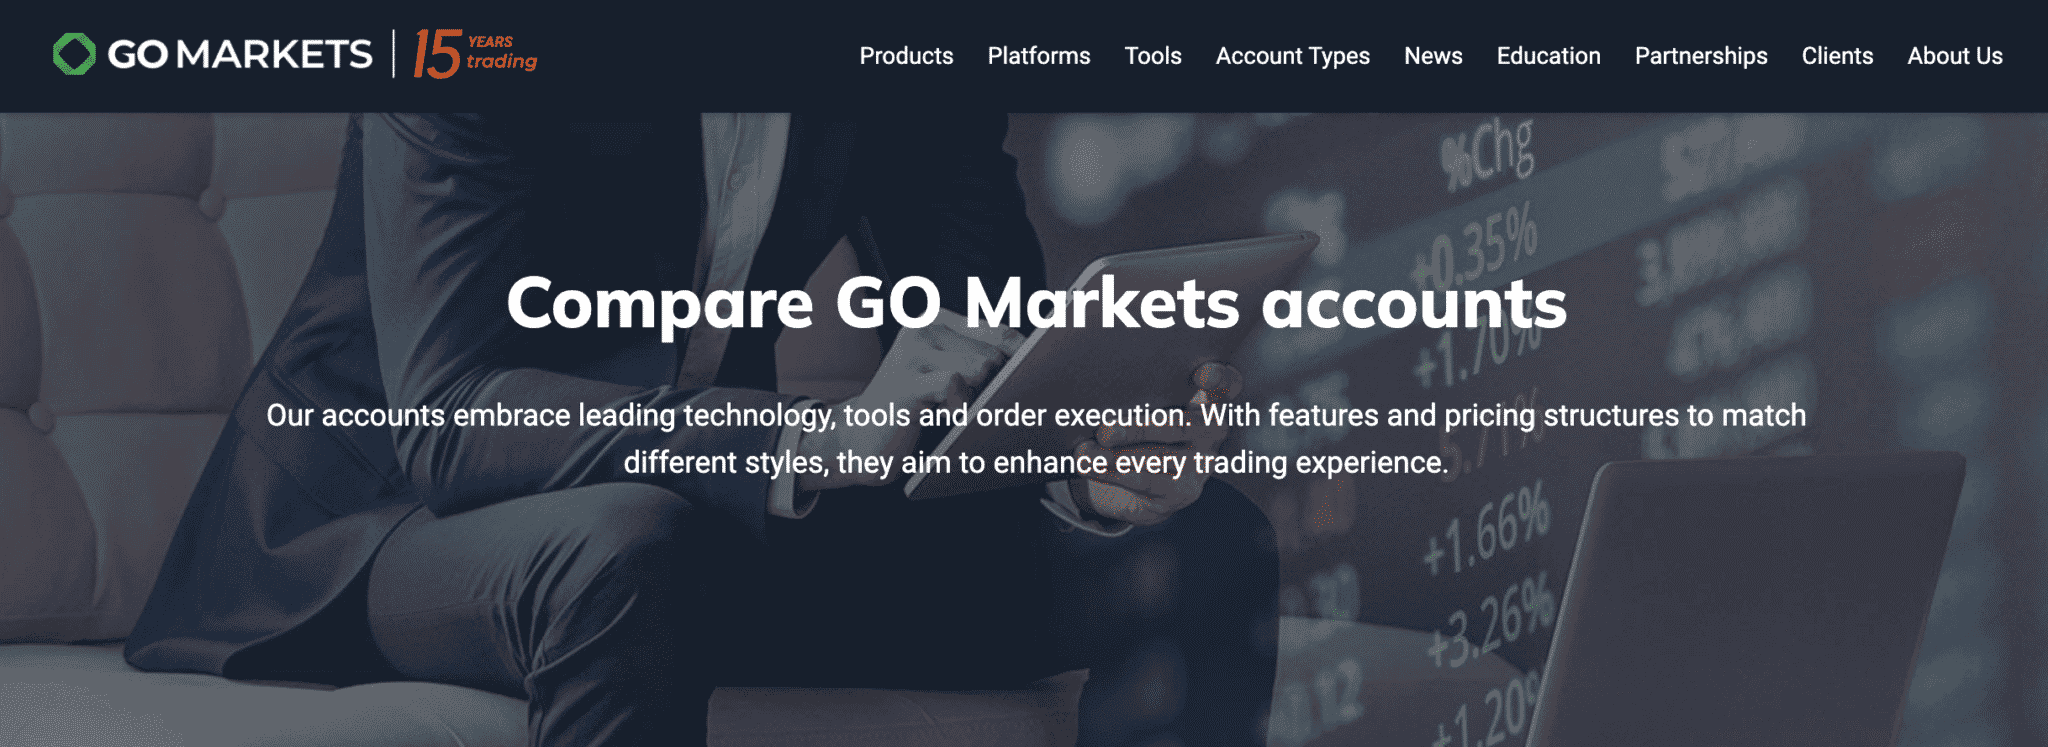 GO Markets Account Types and Features Uganda